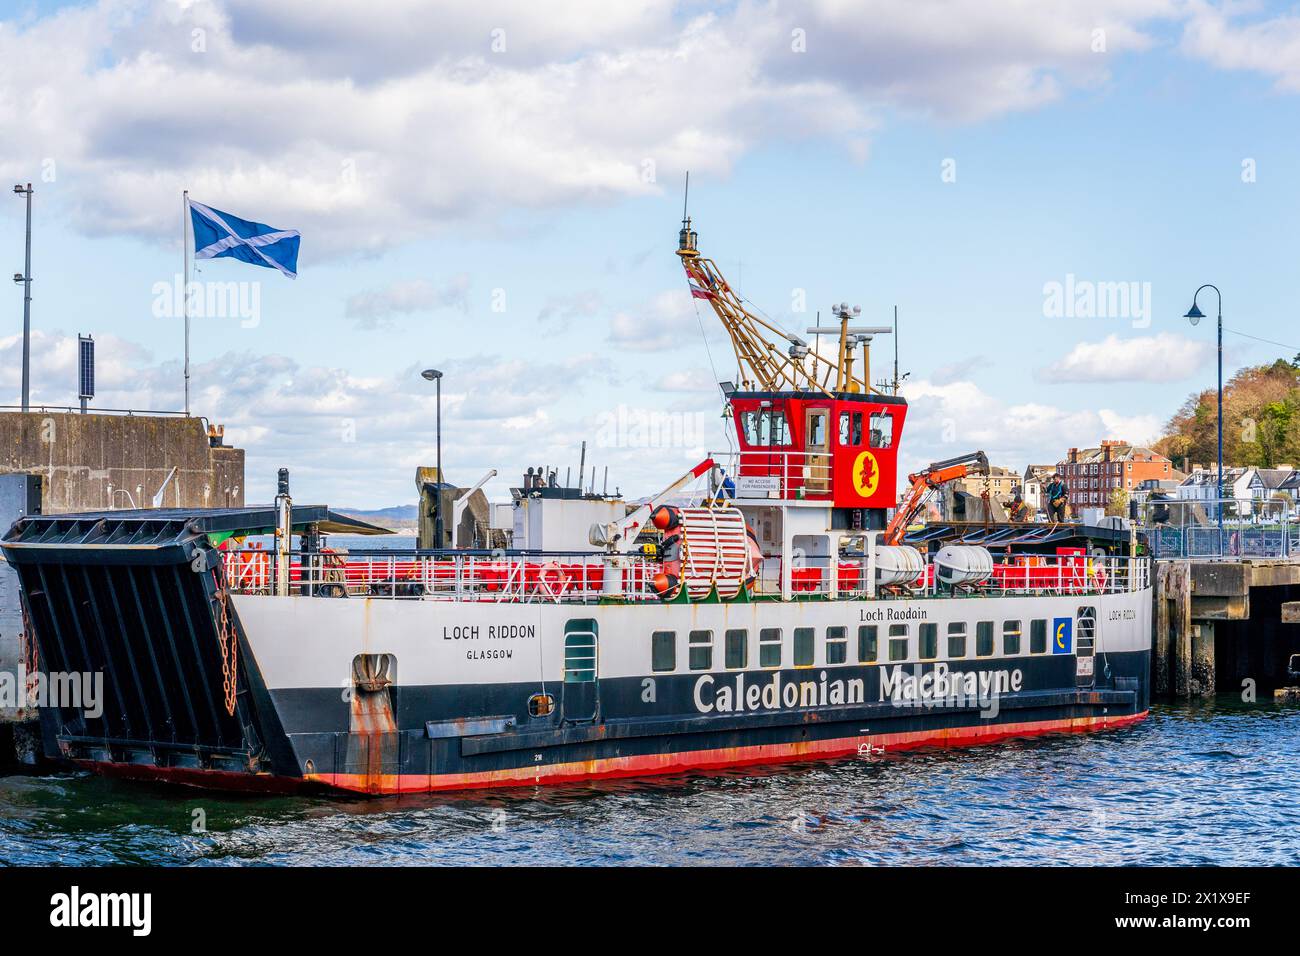 Caledonian MacBrayne MV Loch Riddon, Loch Raodain,  berthed at Rothesay pier, Isle of Bute, Firth of Clyde, Scotland, UK Stock Photo